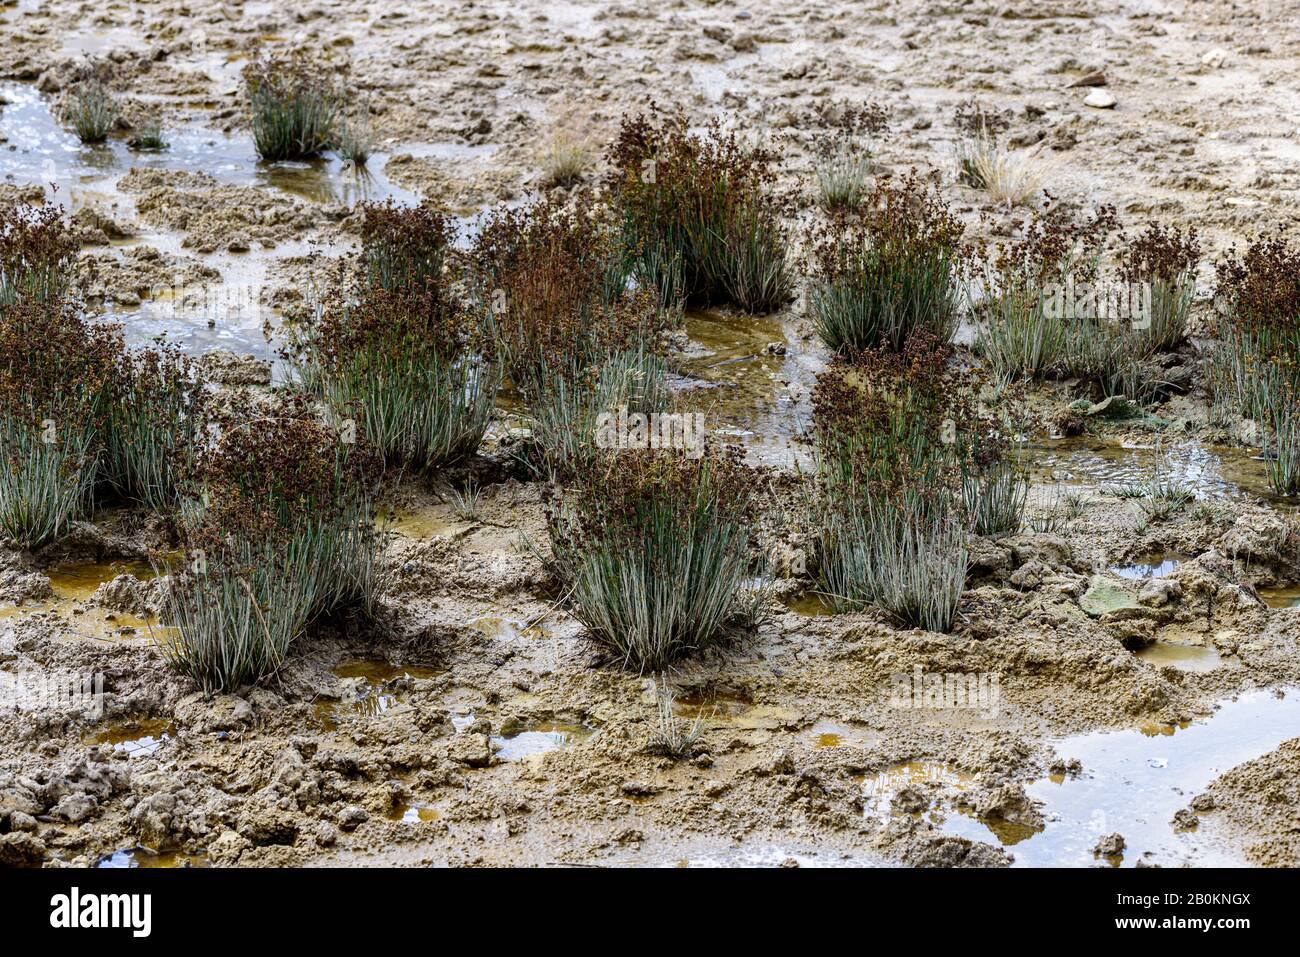 Small bushes growing in mud with small pools of water. Stock Photo